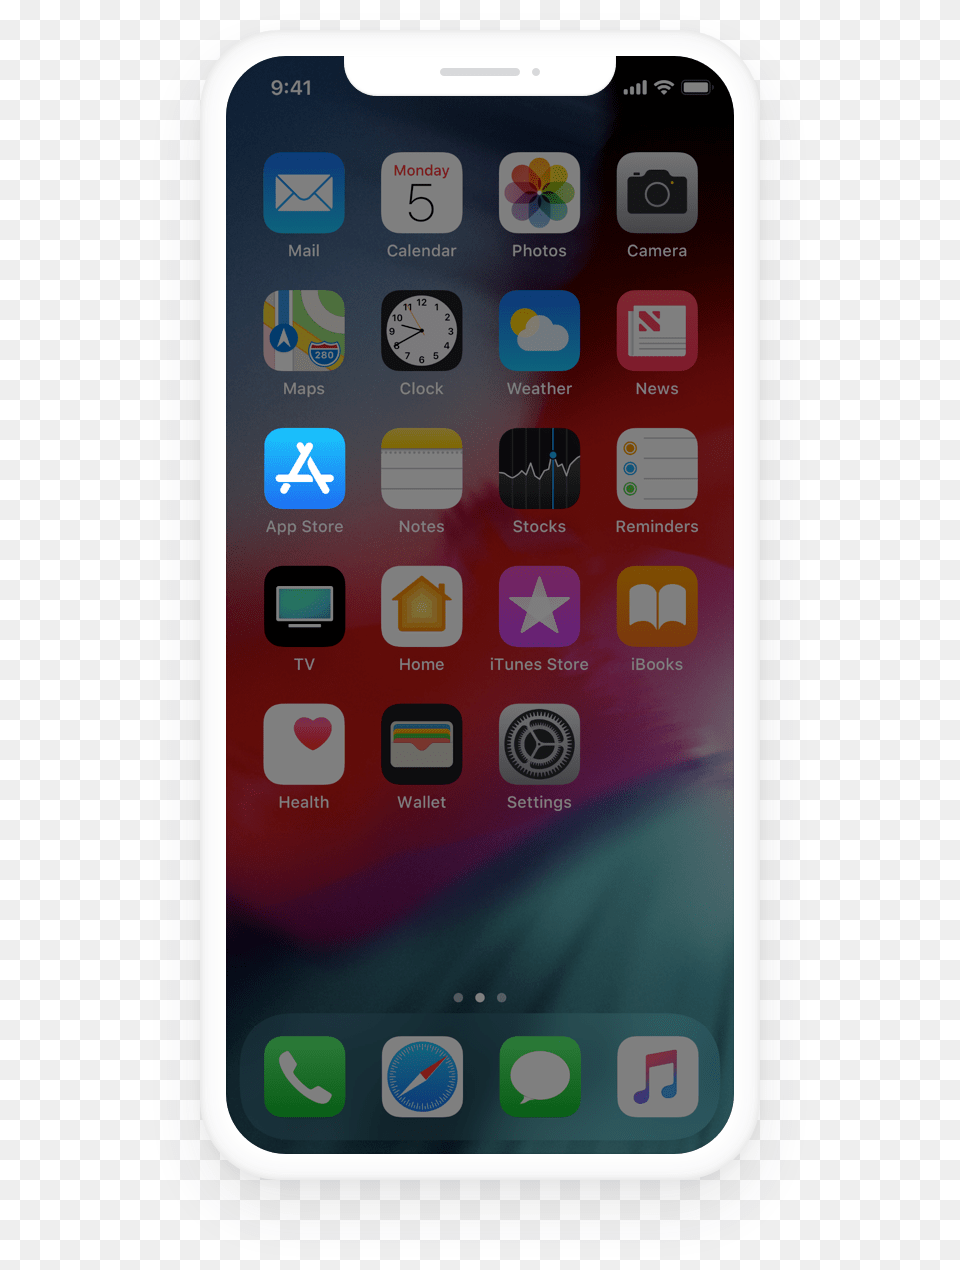 App Store Button, Electronics, Mobile Phone, Phone, Iphone Png Image